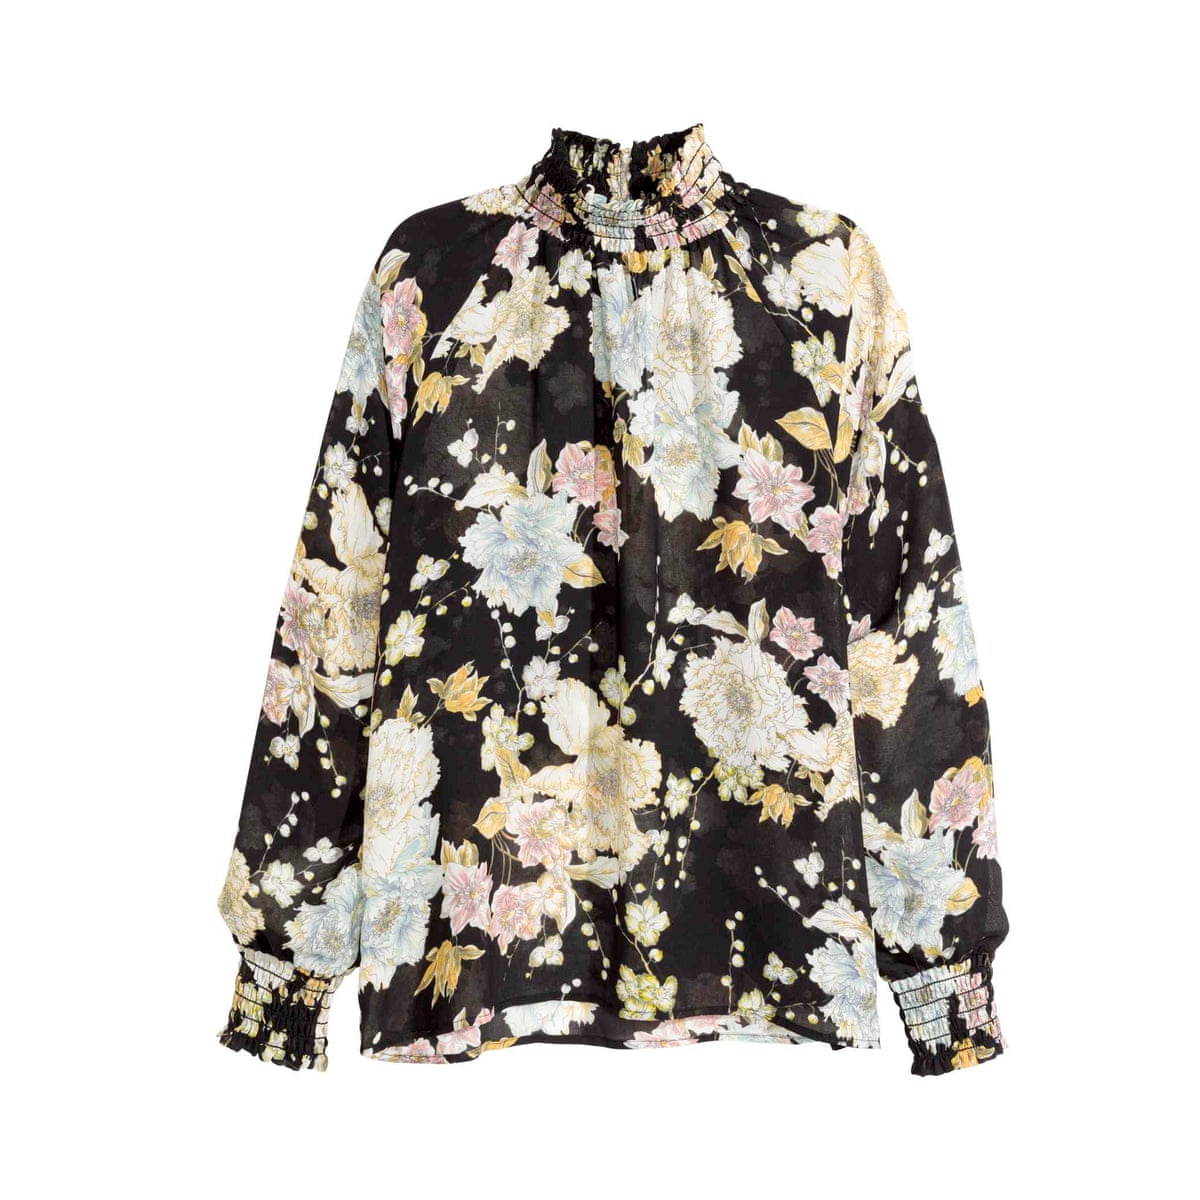 Bake off: ten of the best pie-crust collar blouses | Fashion | The Guardian